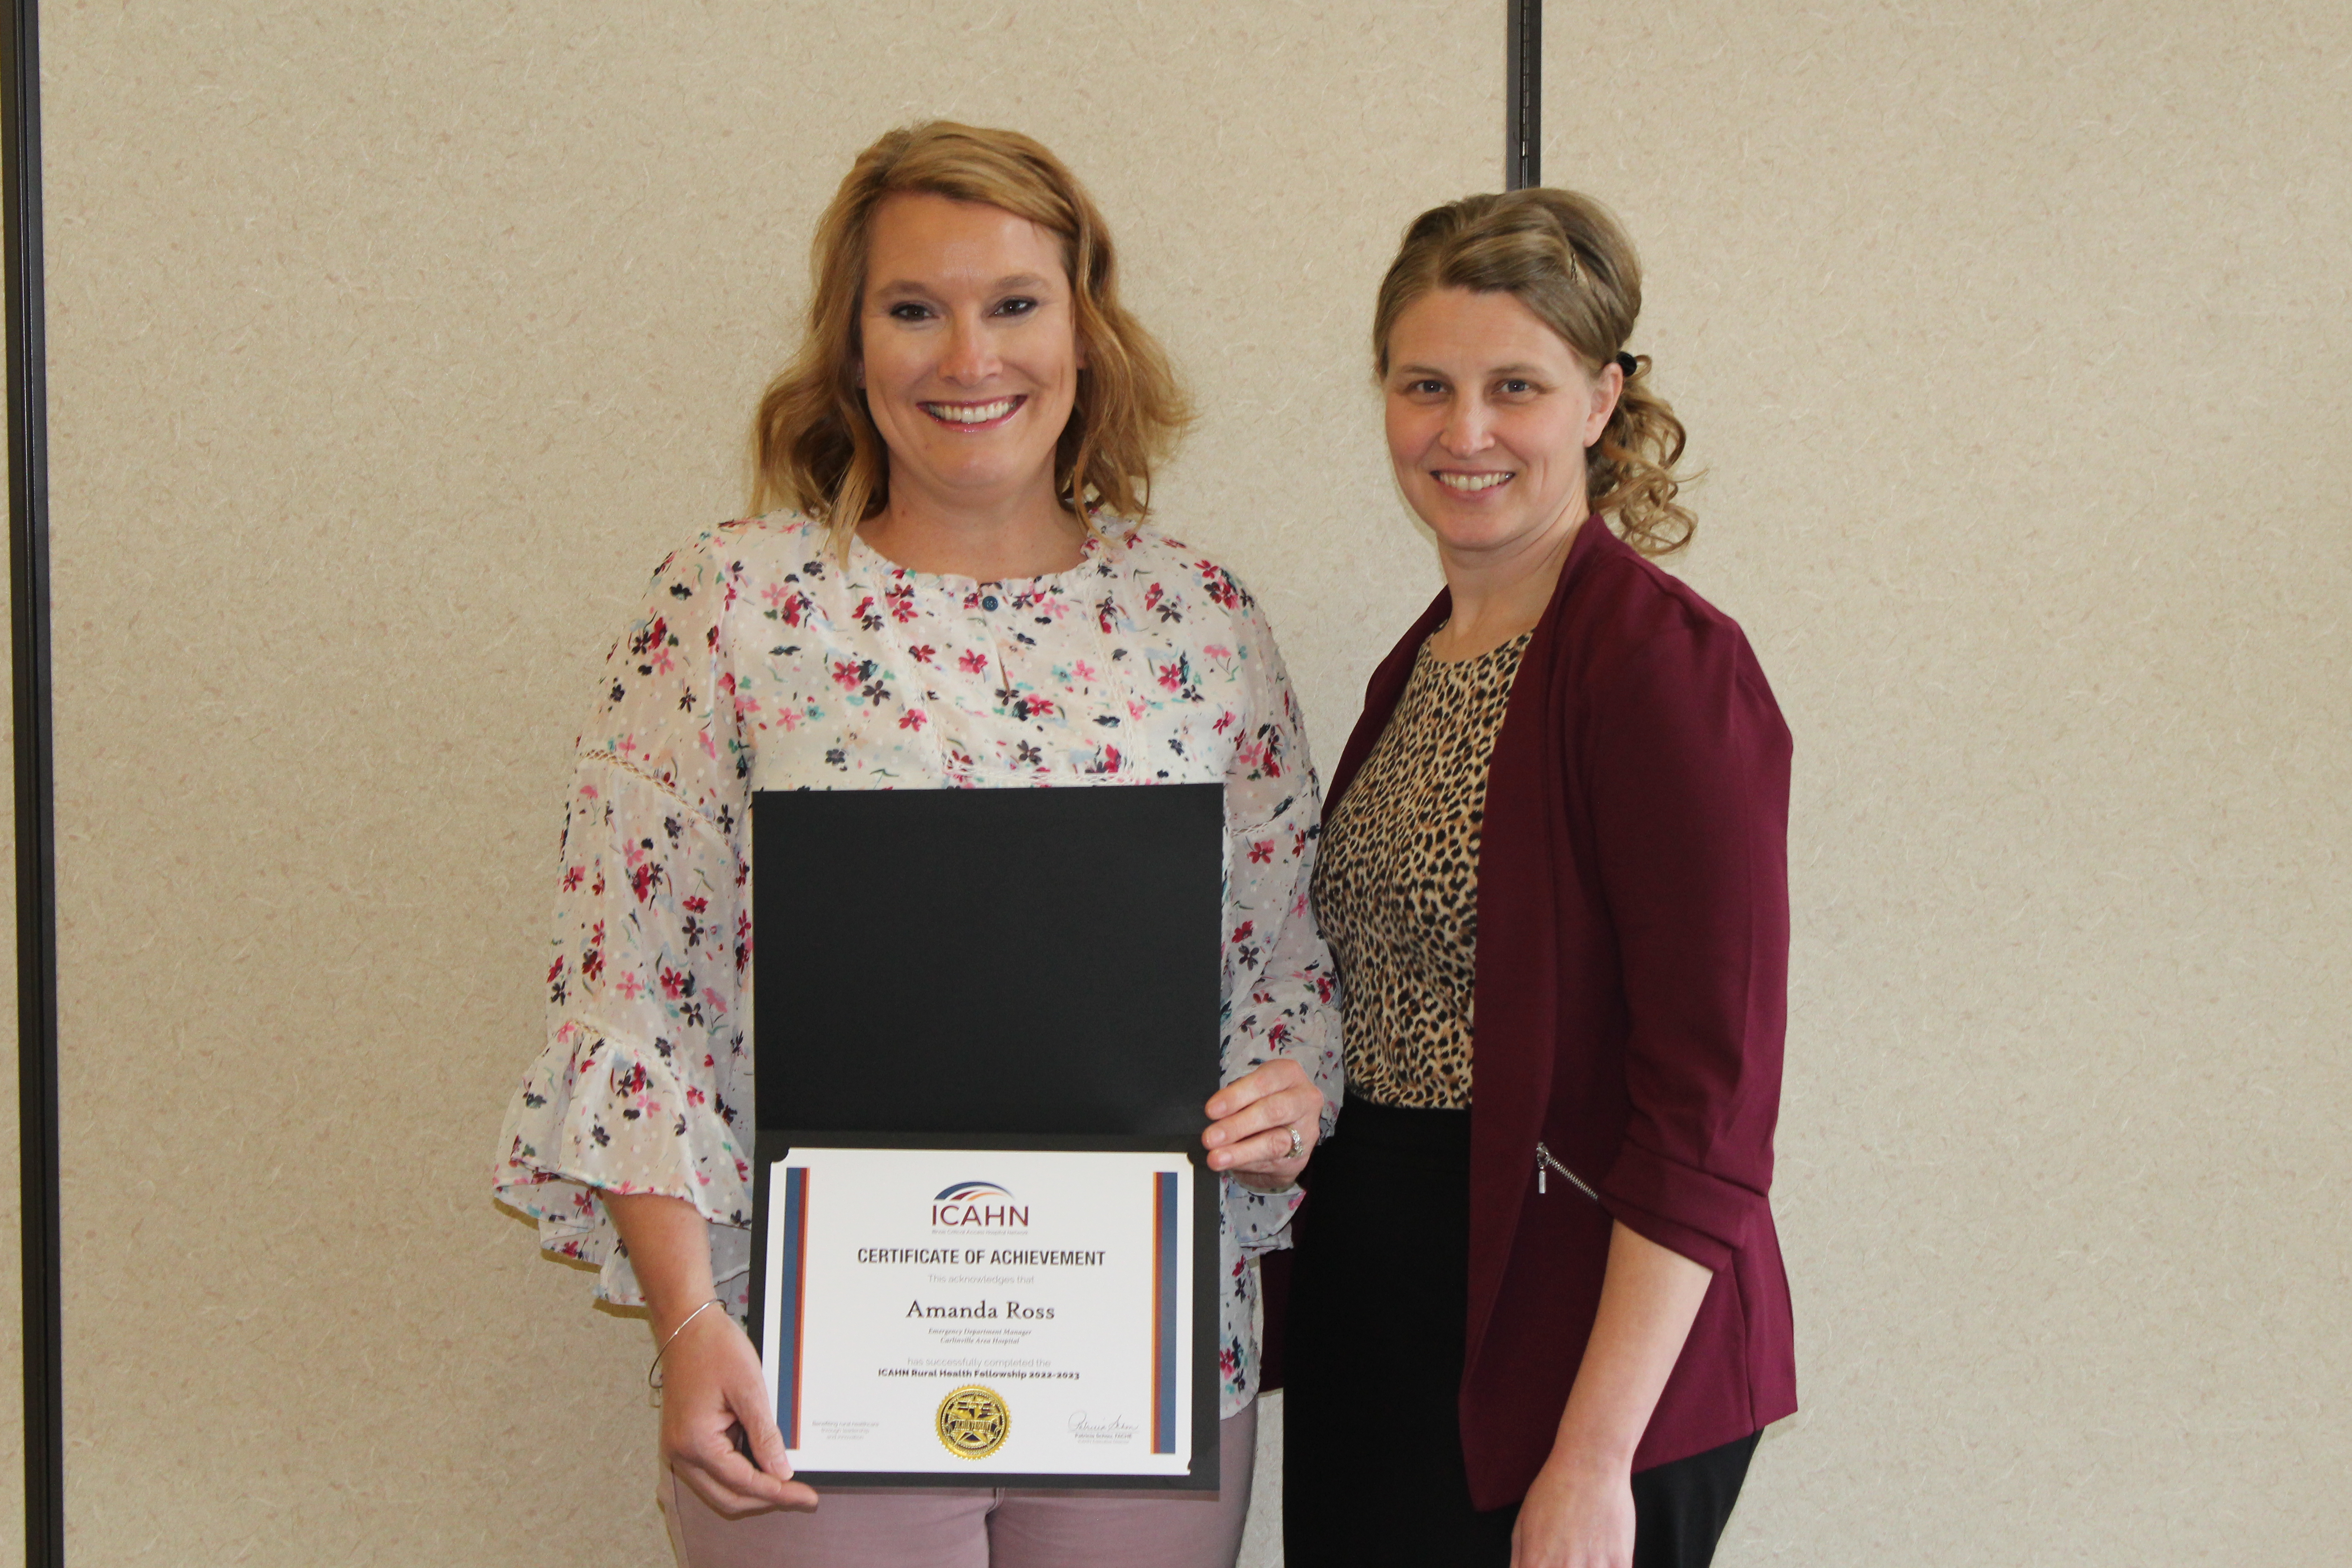 Amanda Ross honored with a certificate of achievement